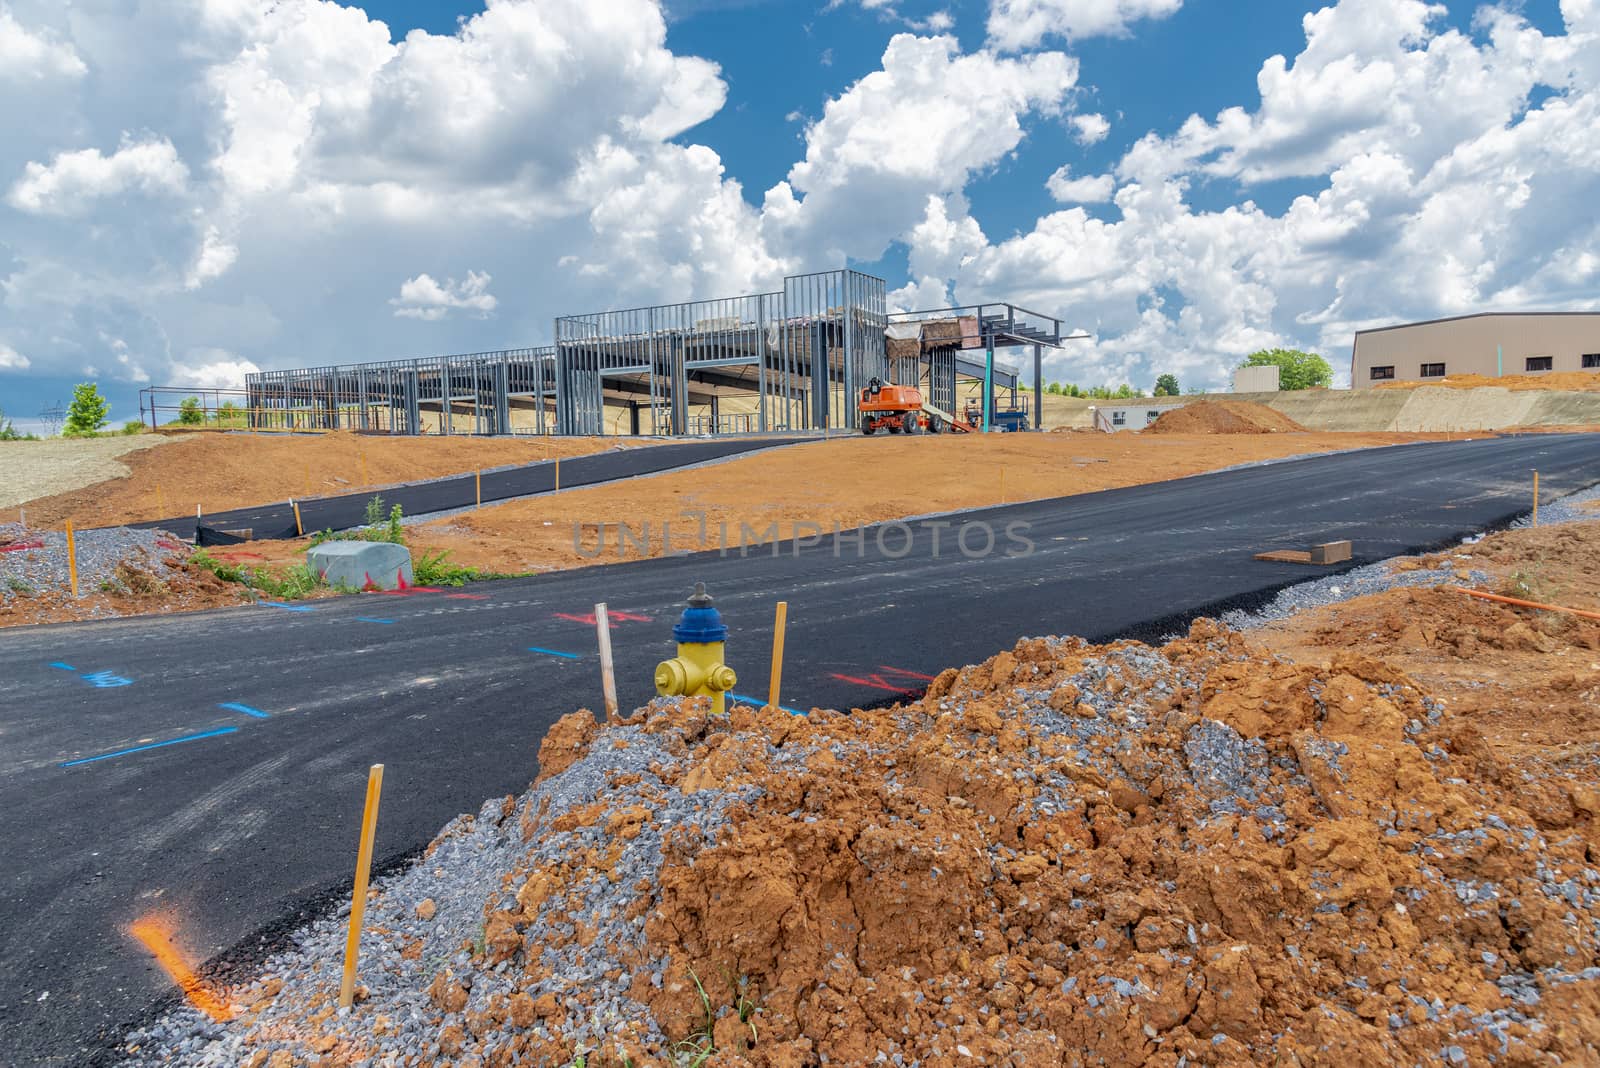 New Commercial Construction Job Site by stockbuster1